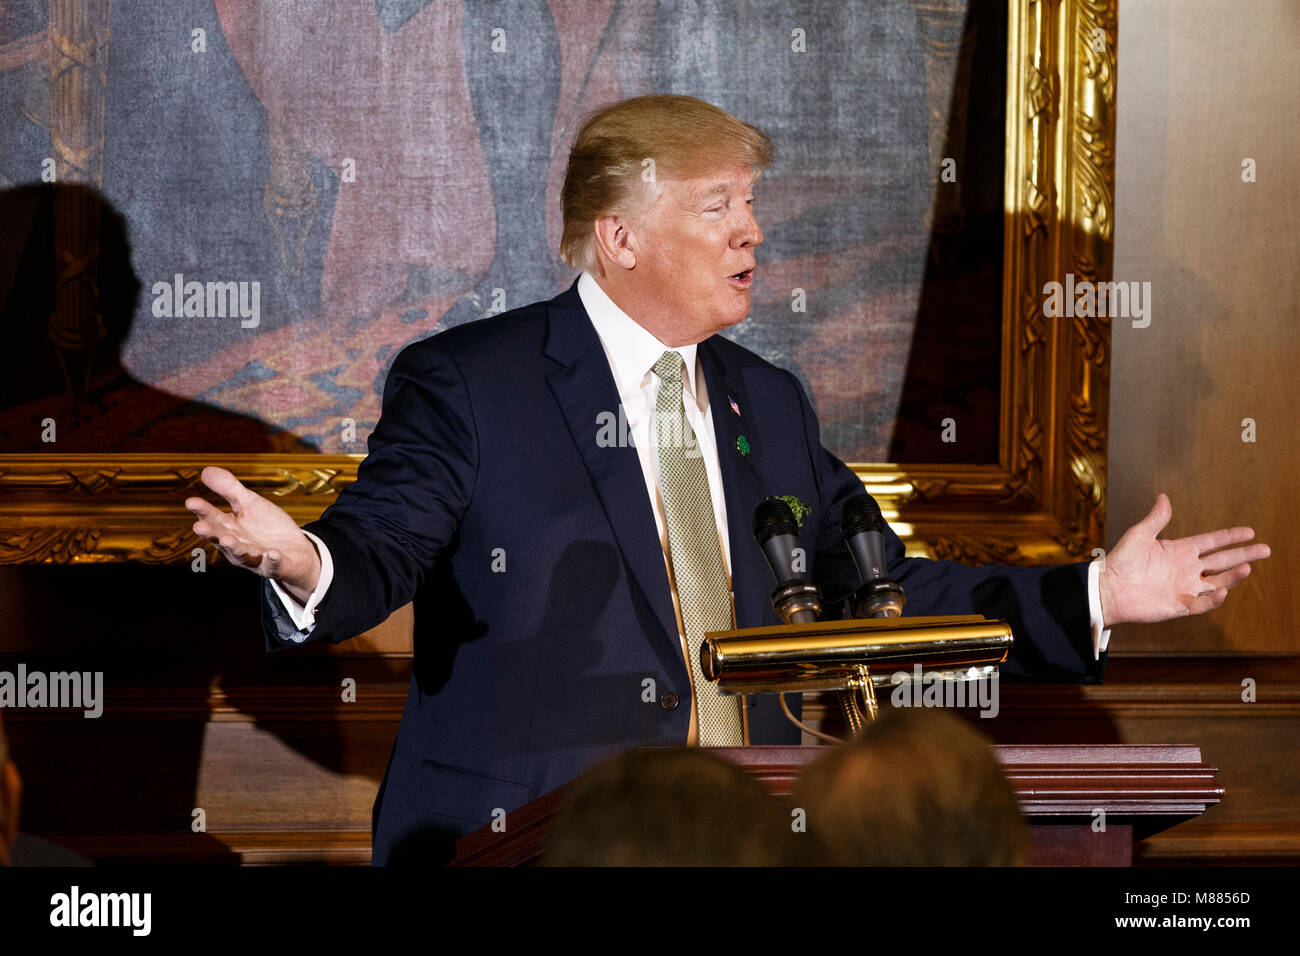 United States President Donald J. Trump speaks at the Friends of Ireland luncheon hosted by United States Speaker of the House of Representatives Paul Ryan, Republican of Wisconsin, at the United States Capitol in Washington, DC on March 15, 2018. Credit: Alex Edelman/CNP /MediaPunch Stock Photo